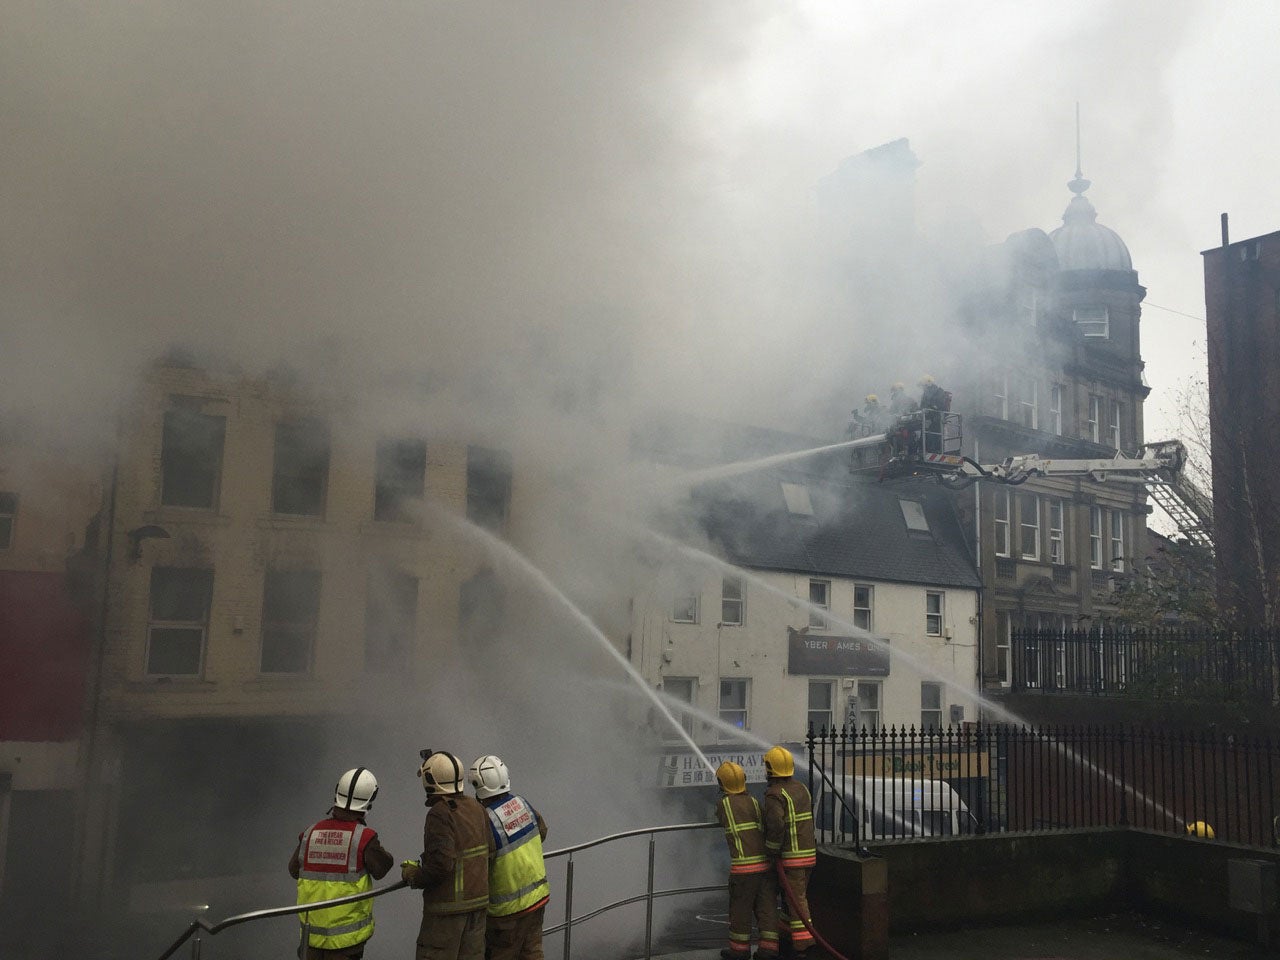 Tyne and Wear firefighters tackle the serious fire that broke out in a shop on Cross Street